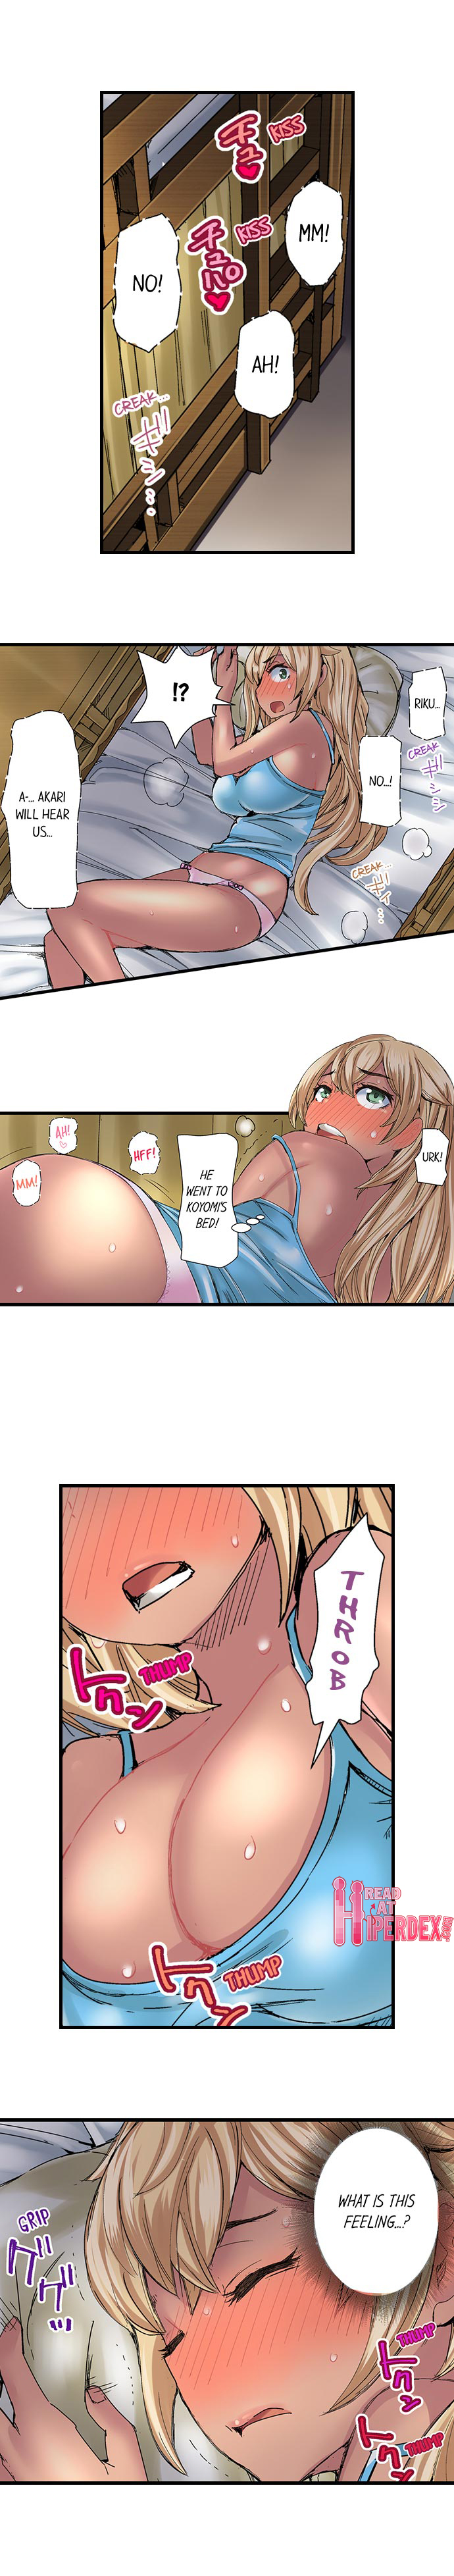 Taking a Hot Tanned Chick’s Virginity - Chapter 26 Page 2